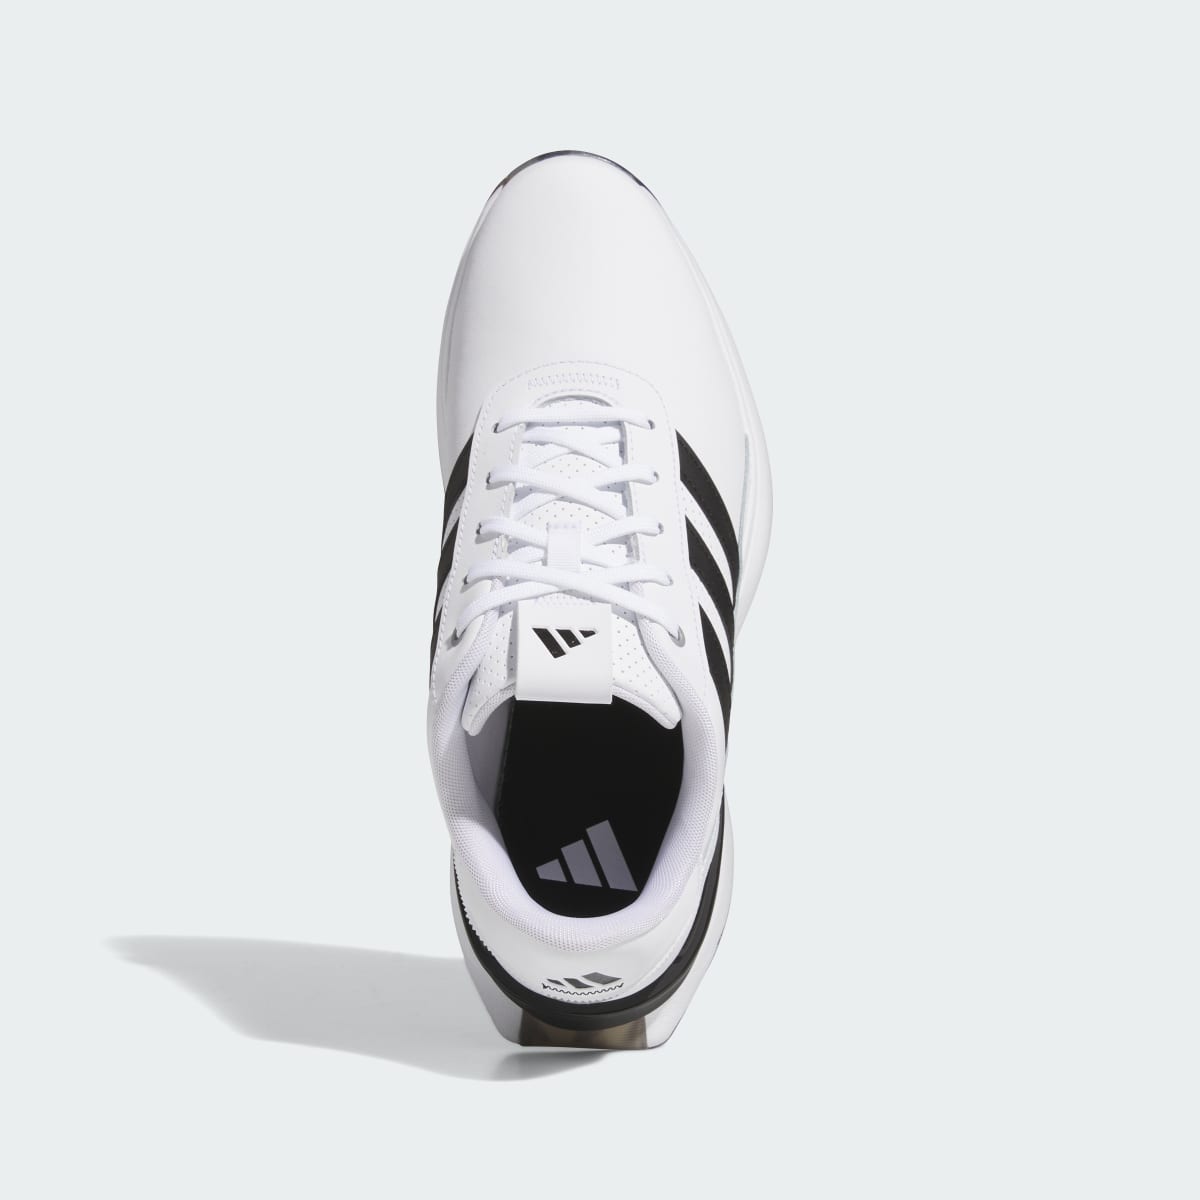 Adidas S2G 24 Golf Shoes. 6